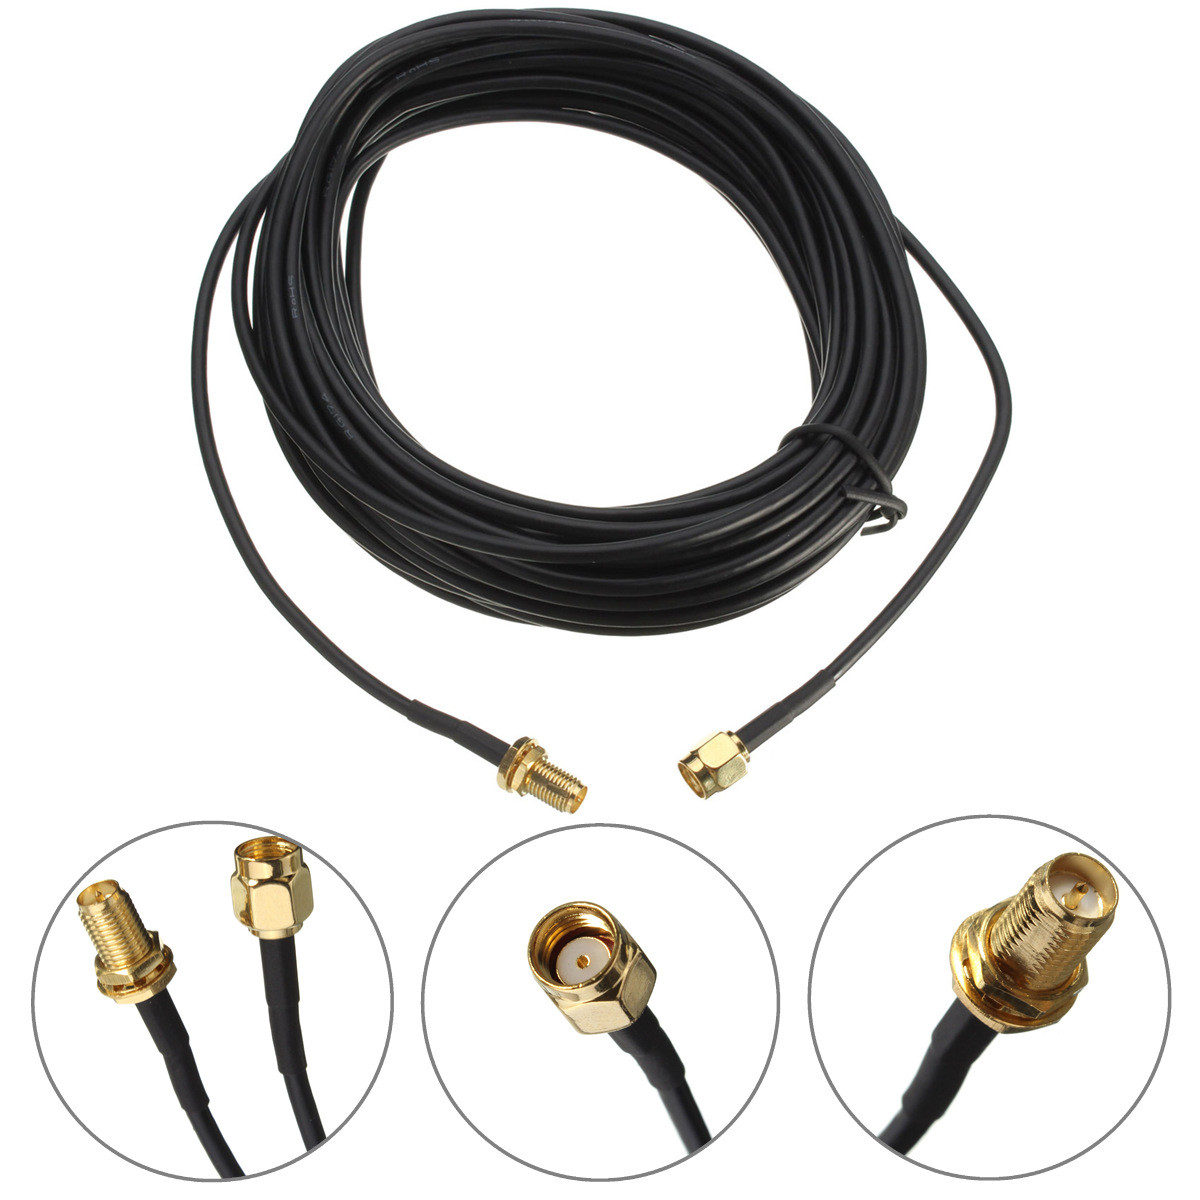 33ft 10M Antenna Extension Cable Cord RG174 RP SMA Male to Female Adapter Router 